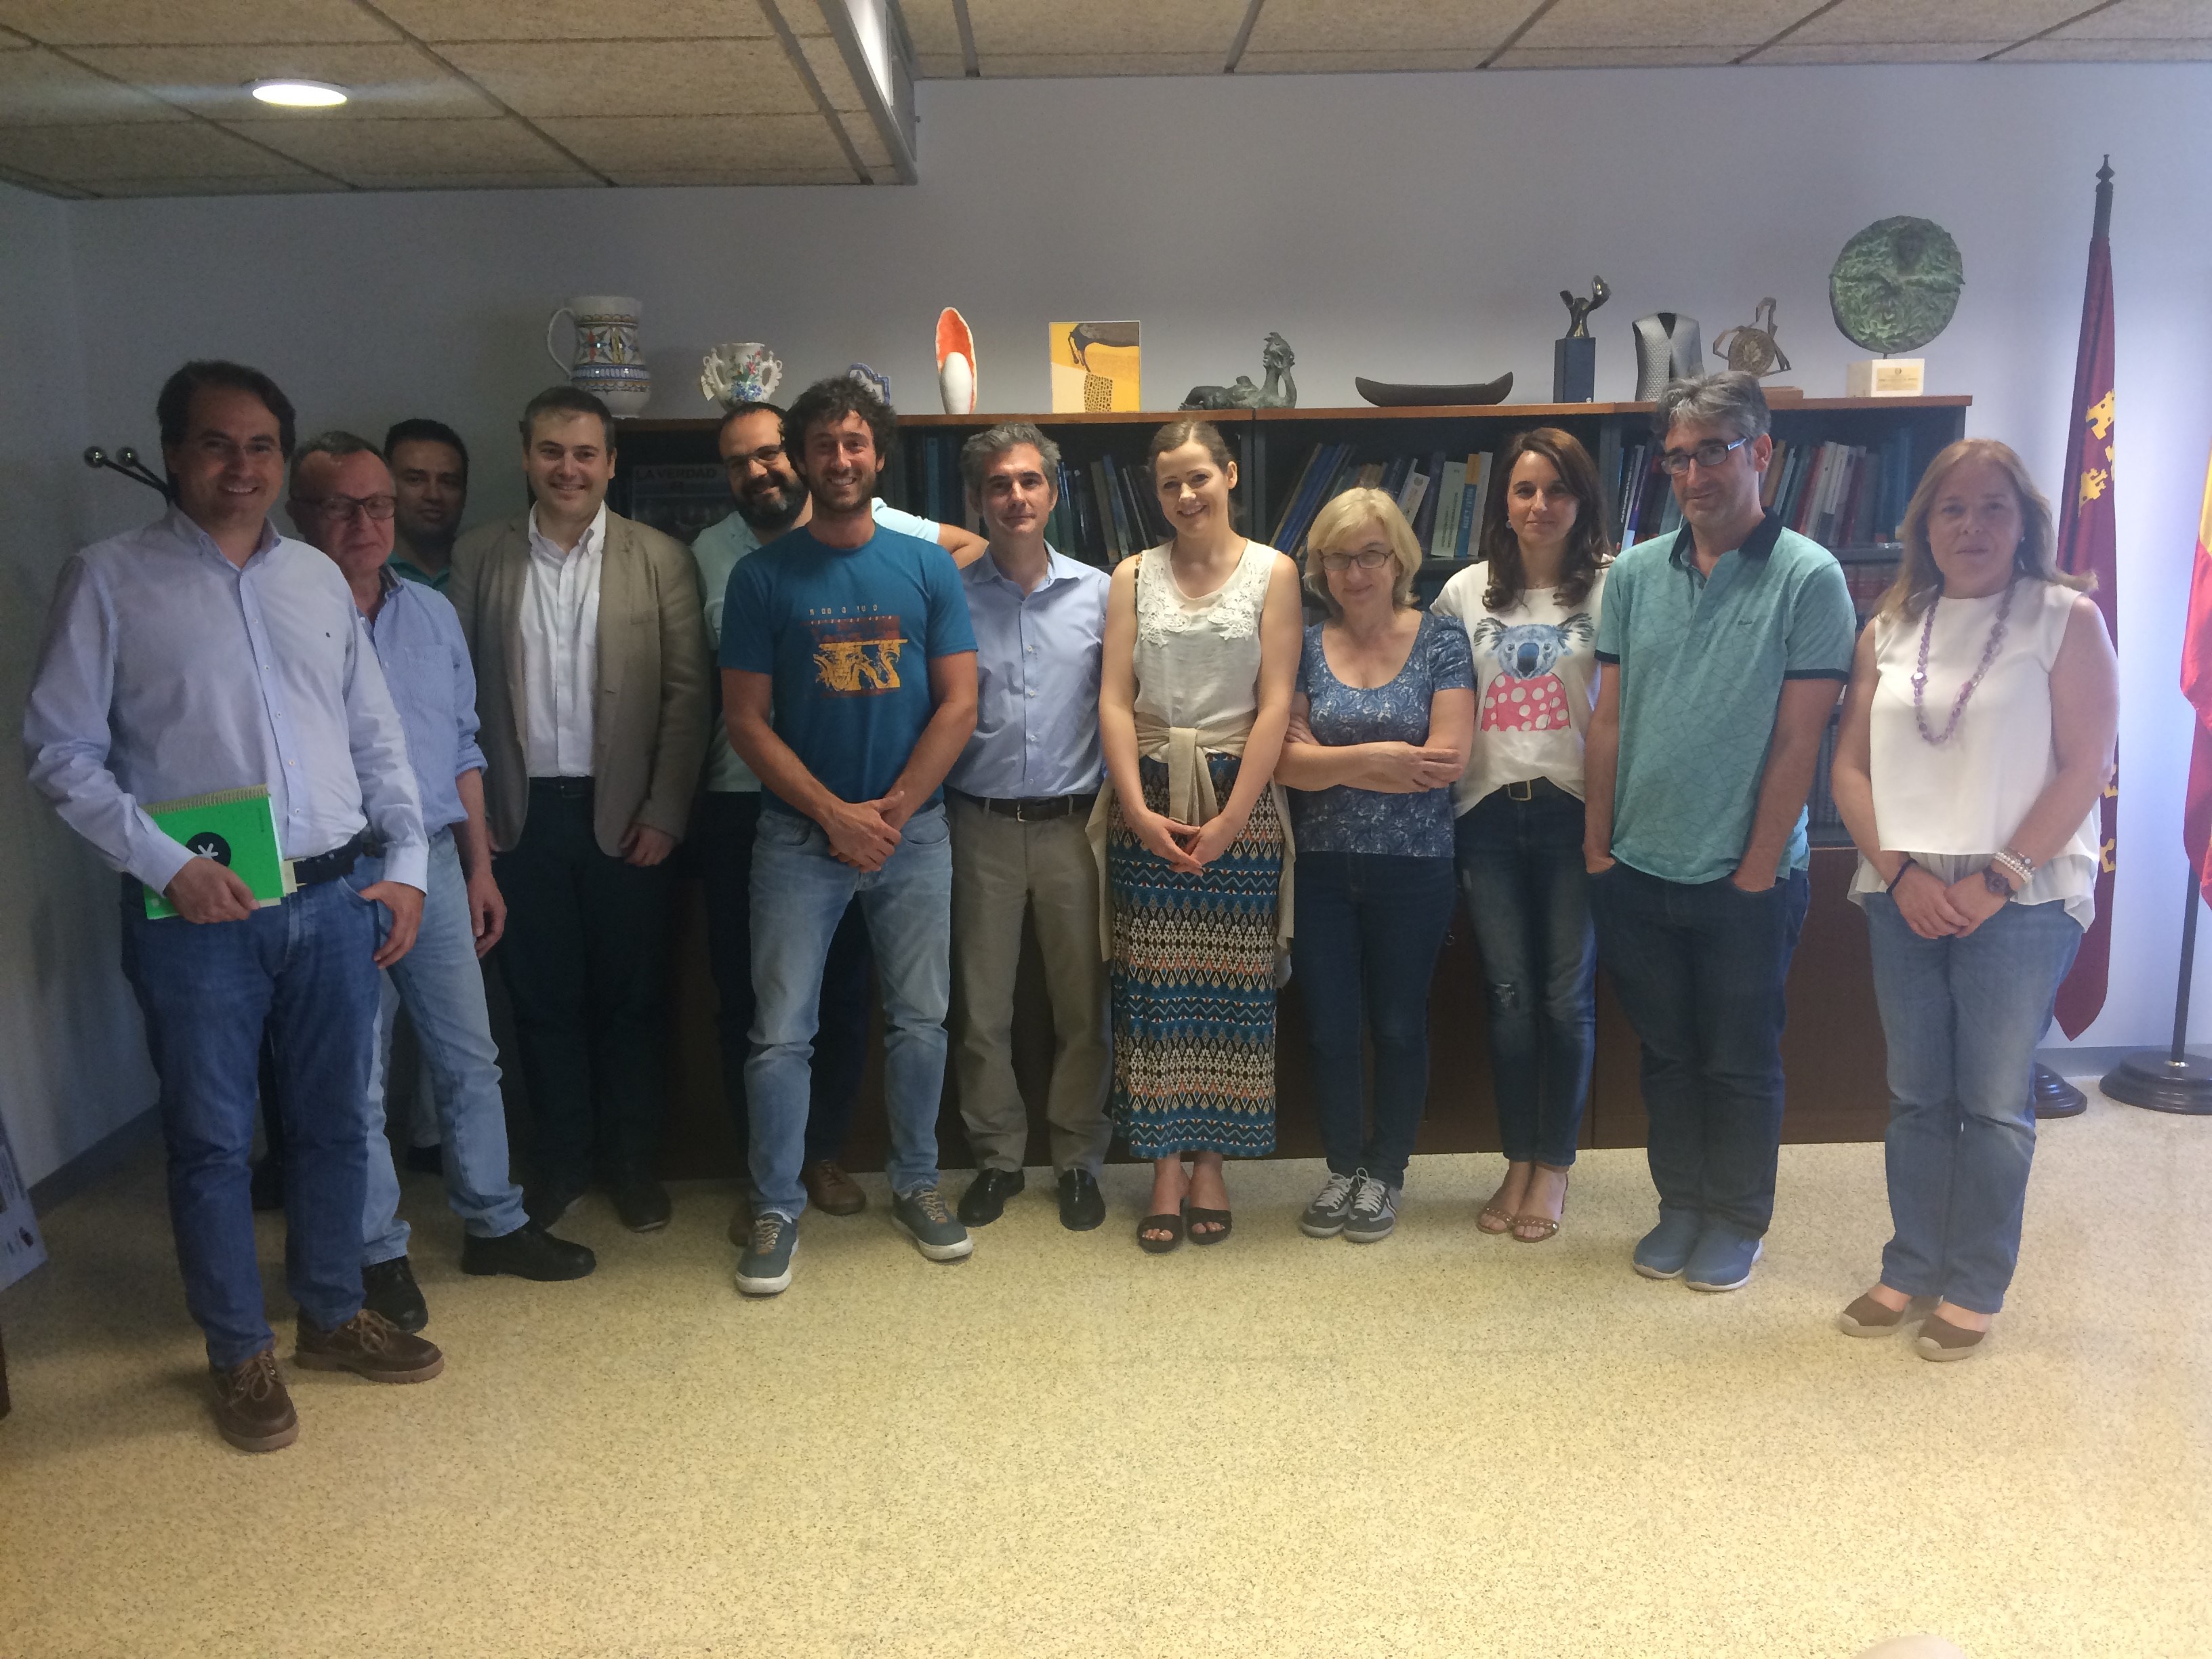 University of Macerata and Ulster University researchers seconded in Murcia, Spain (May 2018)